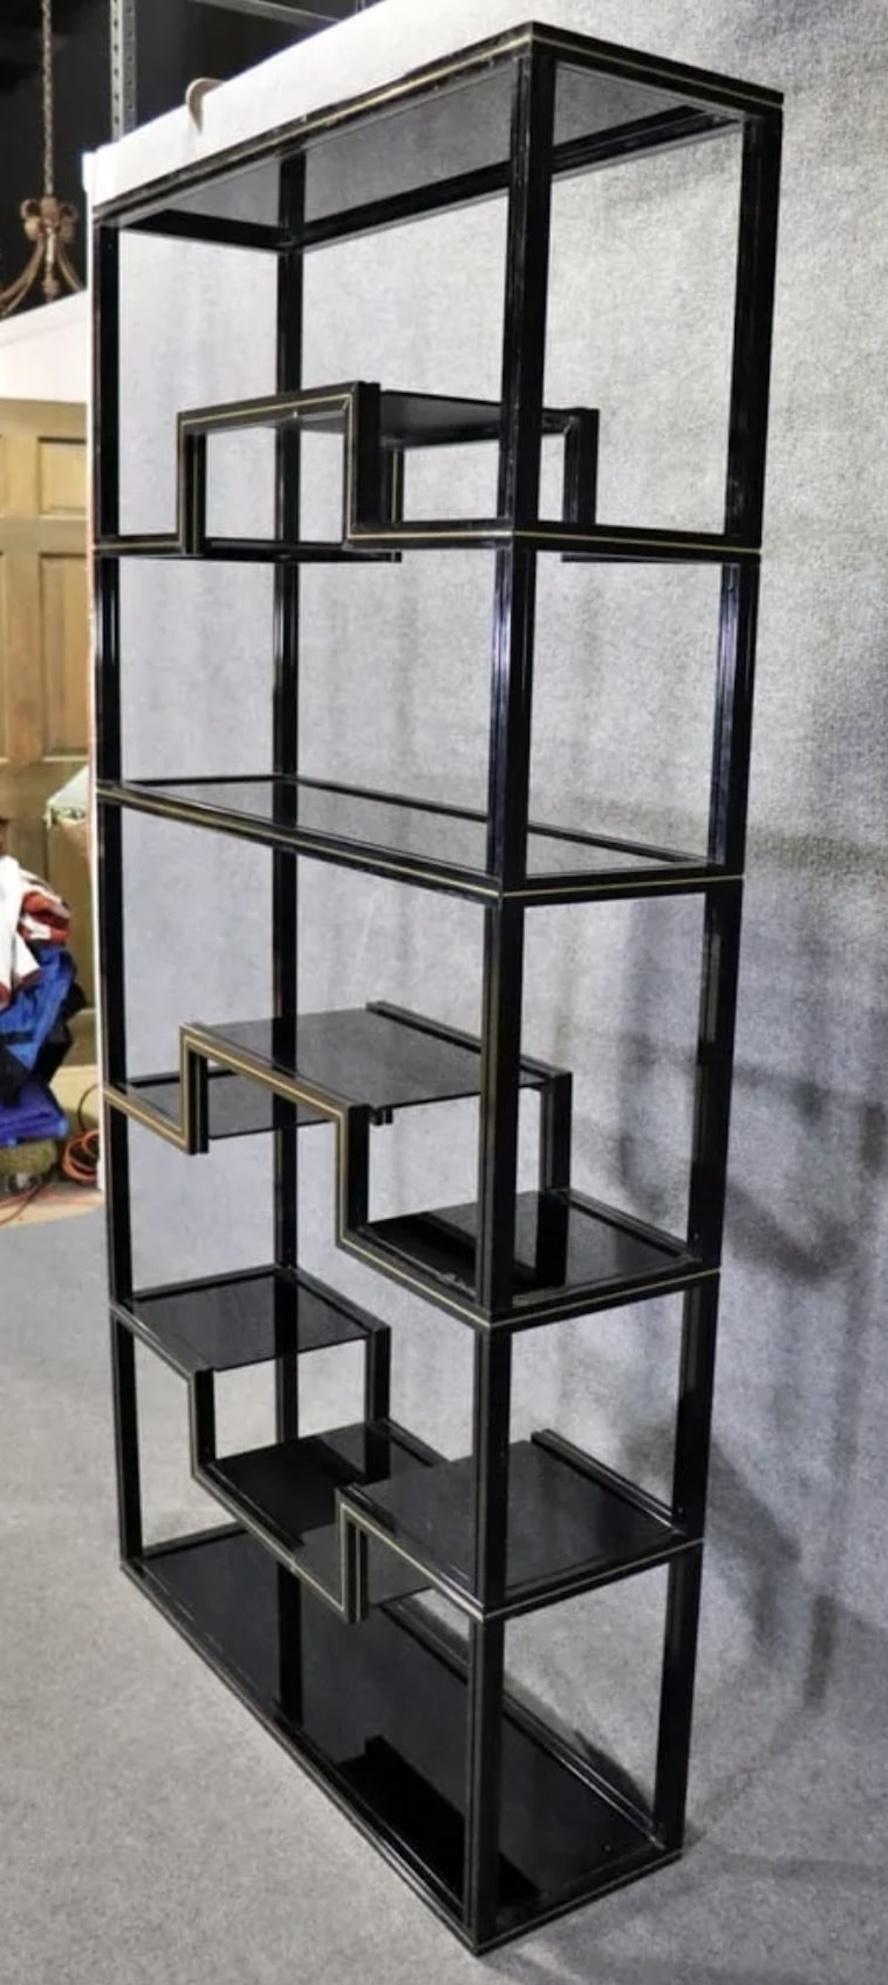 Tall standing bookcase by Pierre Vandel features black lacquered metal with brass trimming. Smoked glass shelves, geometric design frame, standing over six feet tall.
Please confirm location NY or NJ